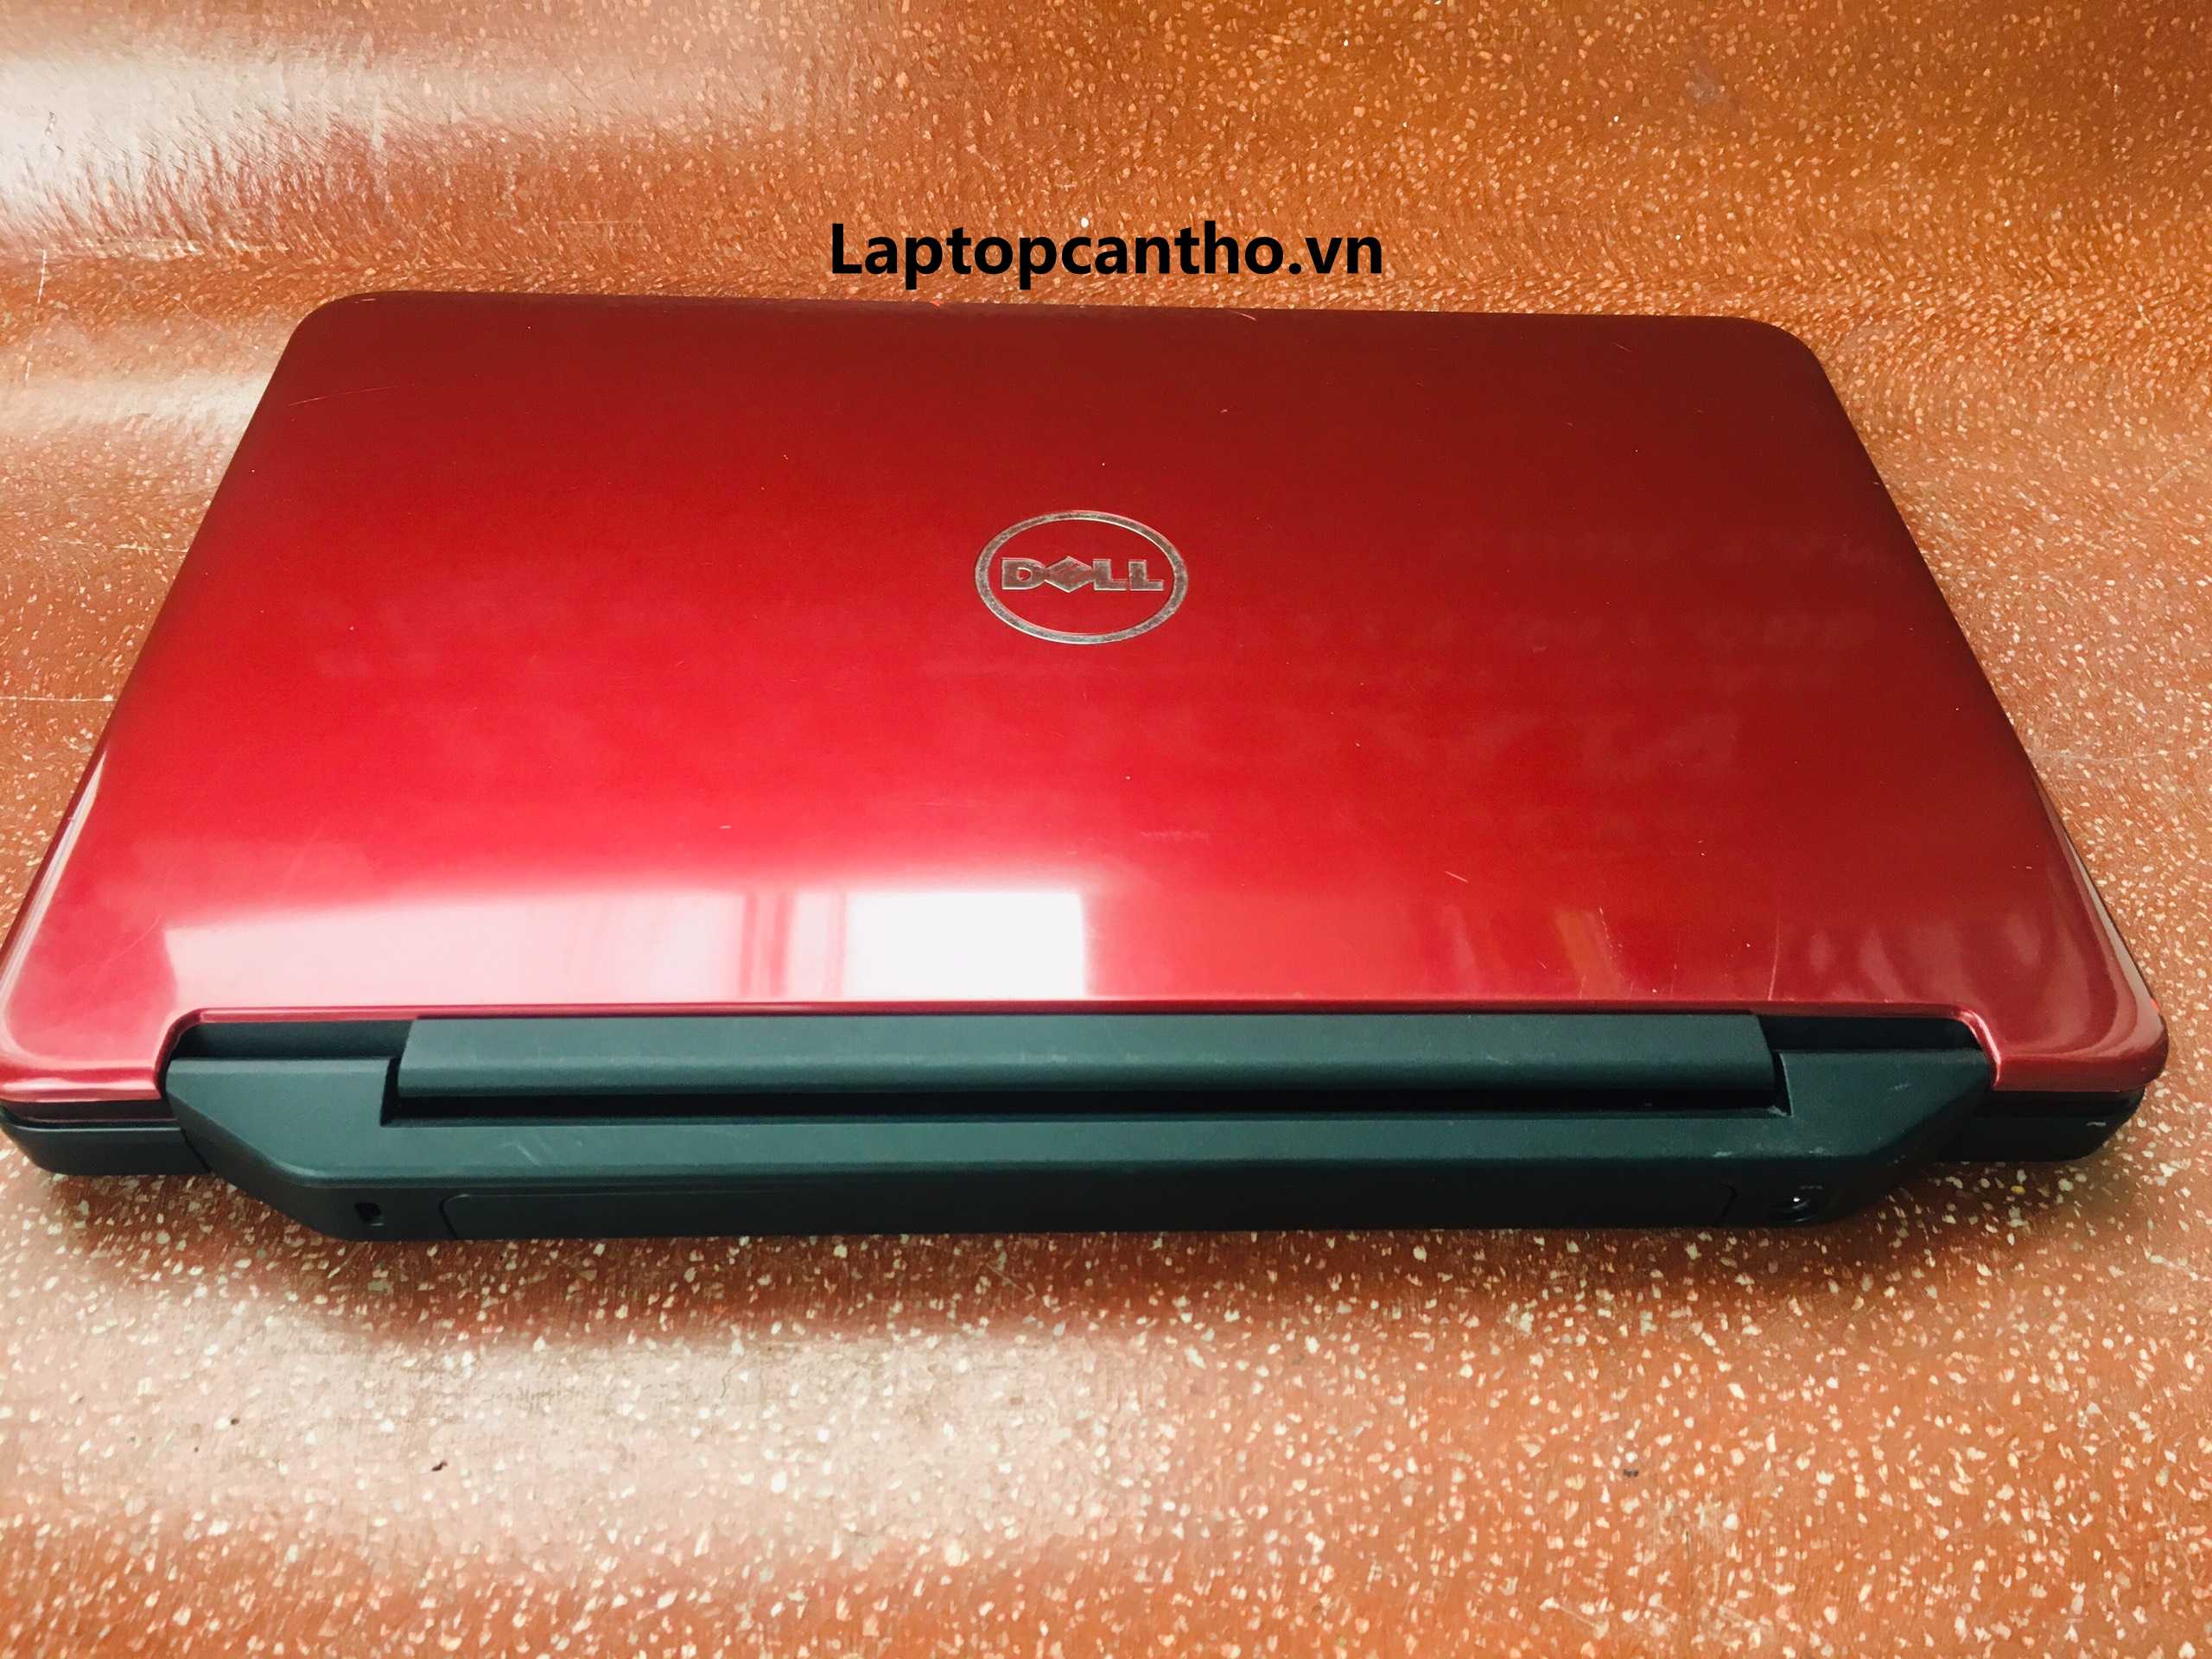 DELL INSPIRON N5050